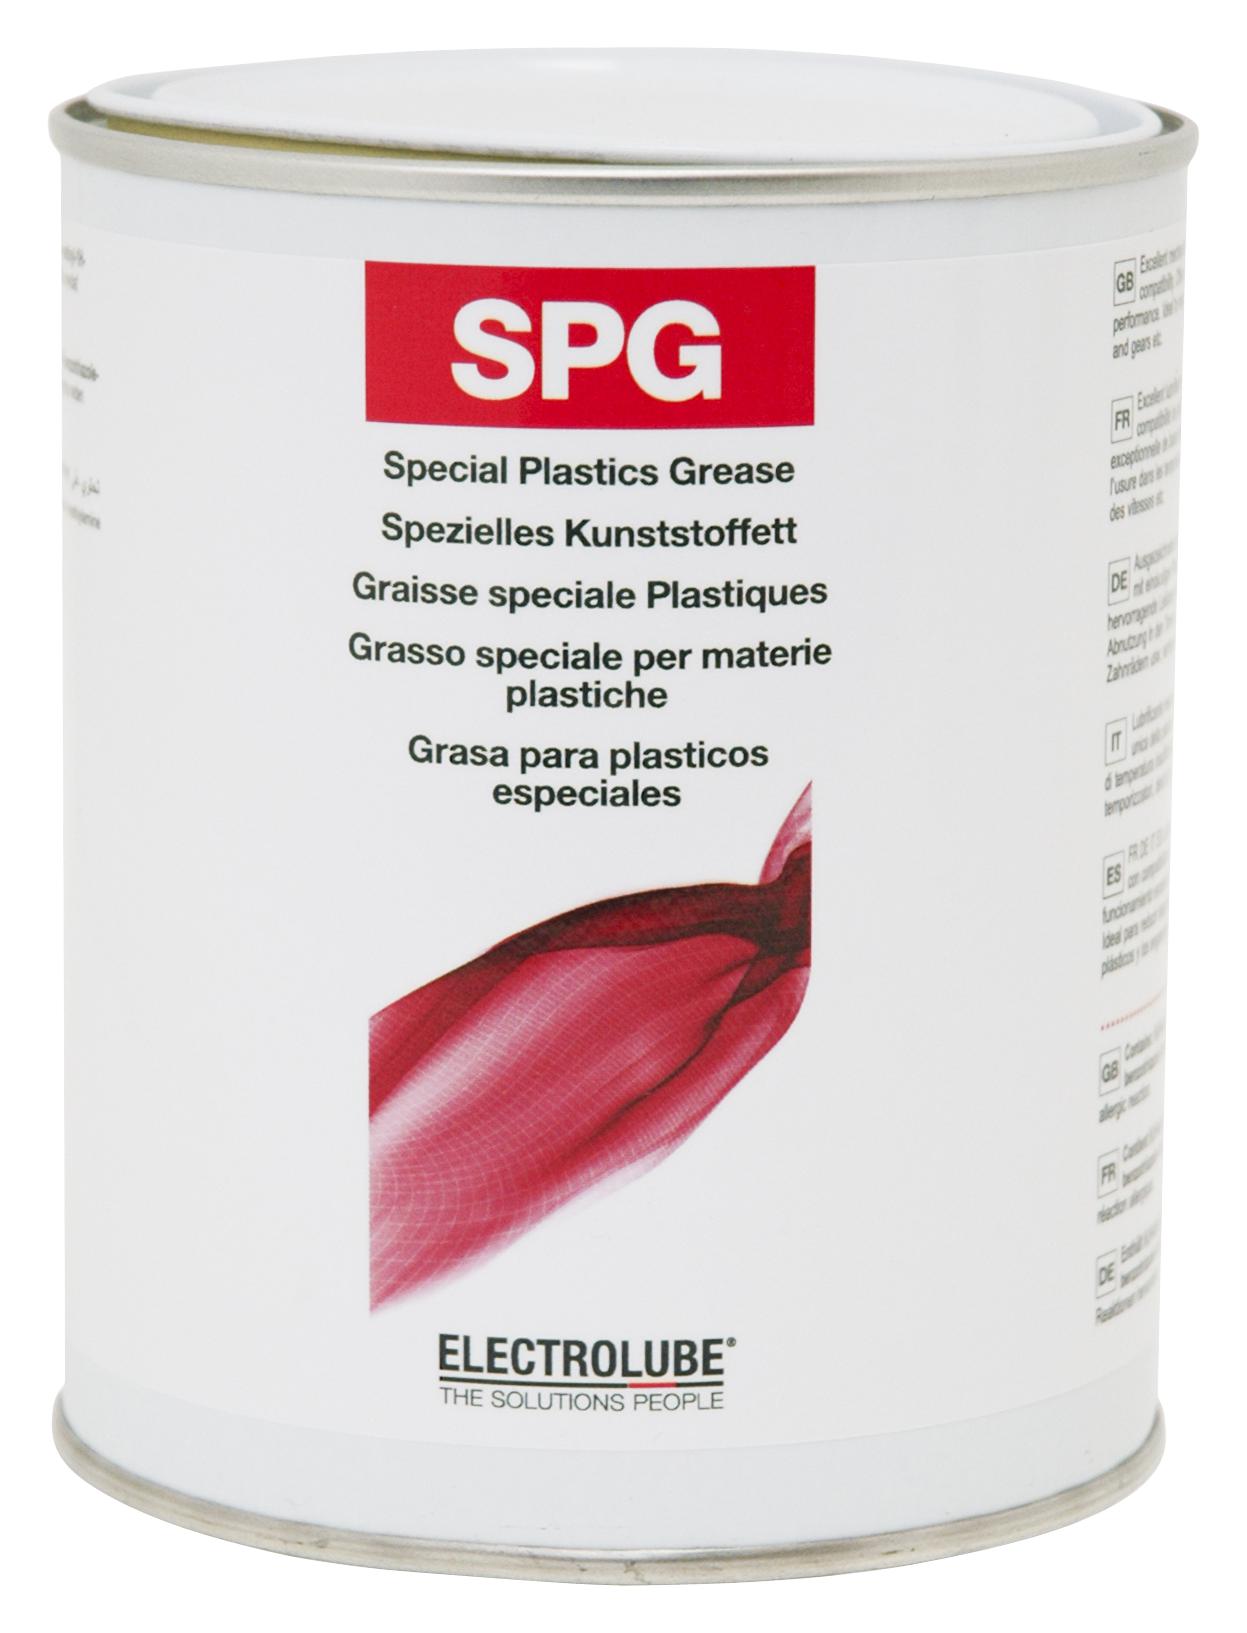 SPG900G GREASE, SPECIAL PLASTICS, ESPG, 900G ELECTROLUBE